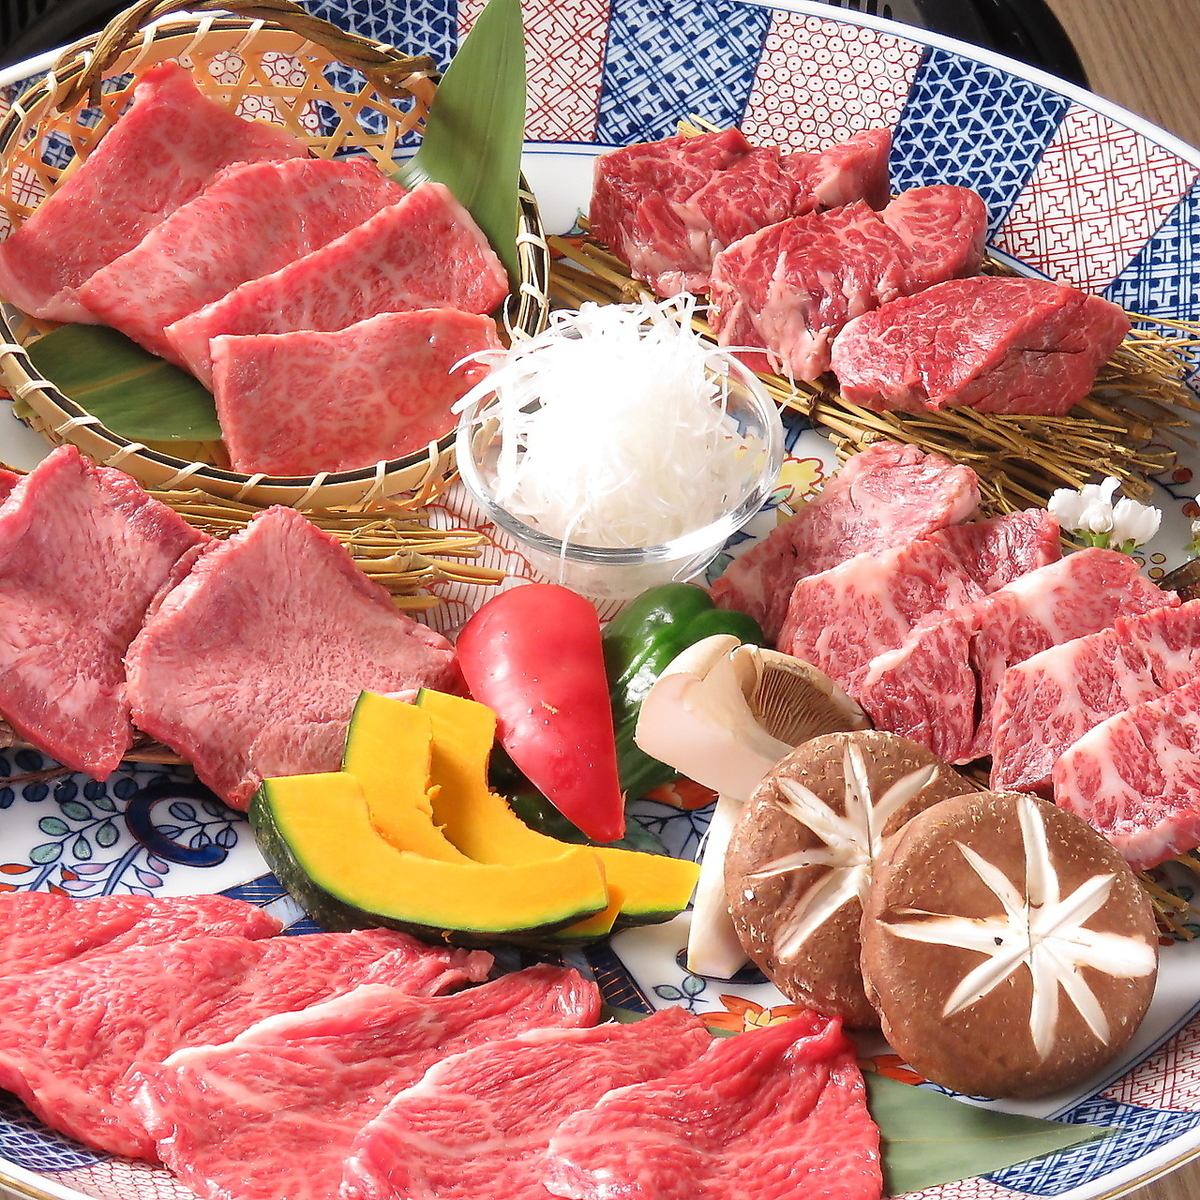 Lunch is decided by yakiniku lunch ♪ Lunch is also open for dinner ◎